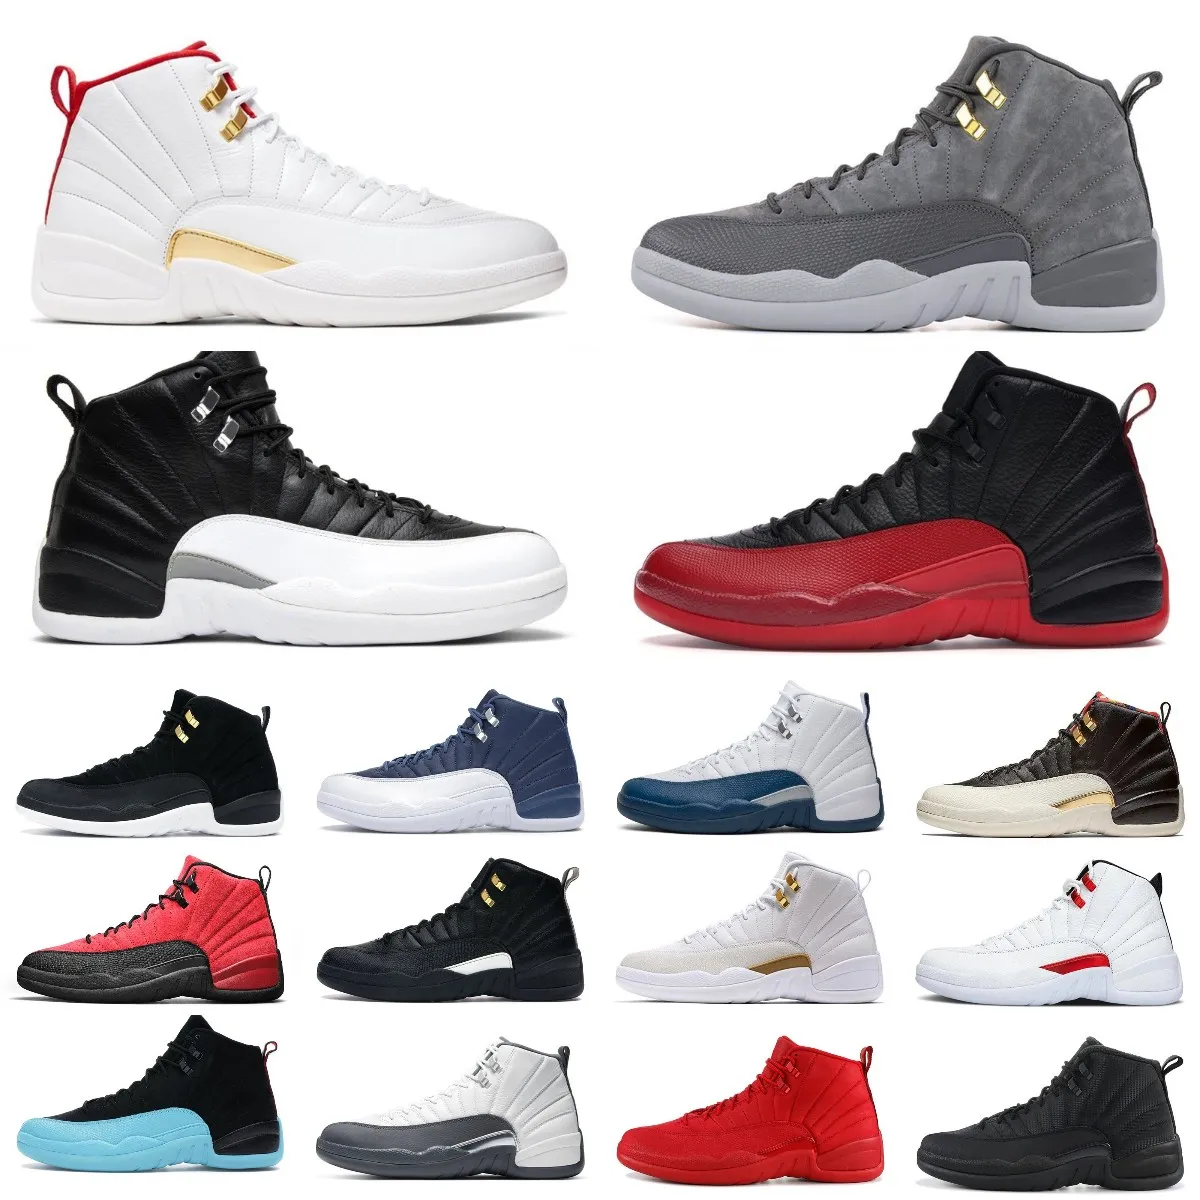 2022 NEW Stealth 12s Basketball Shoes Jumpman 12 Hyper Royal Playoffs Royalty Taxi Flu Game Twist Utility Low Easter Mens Trainers Dark Concord Wings Sneakers